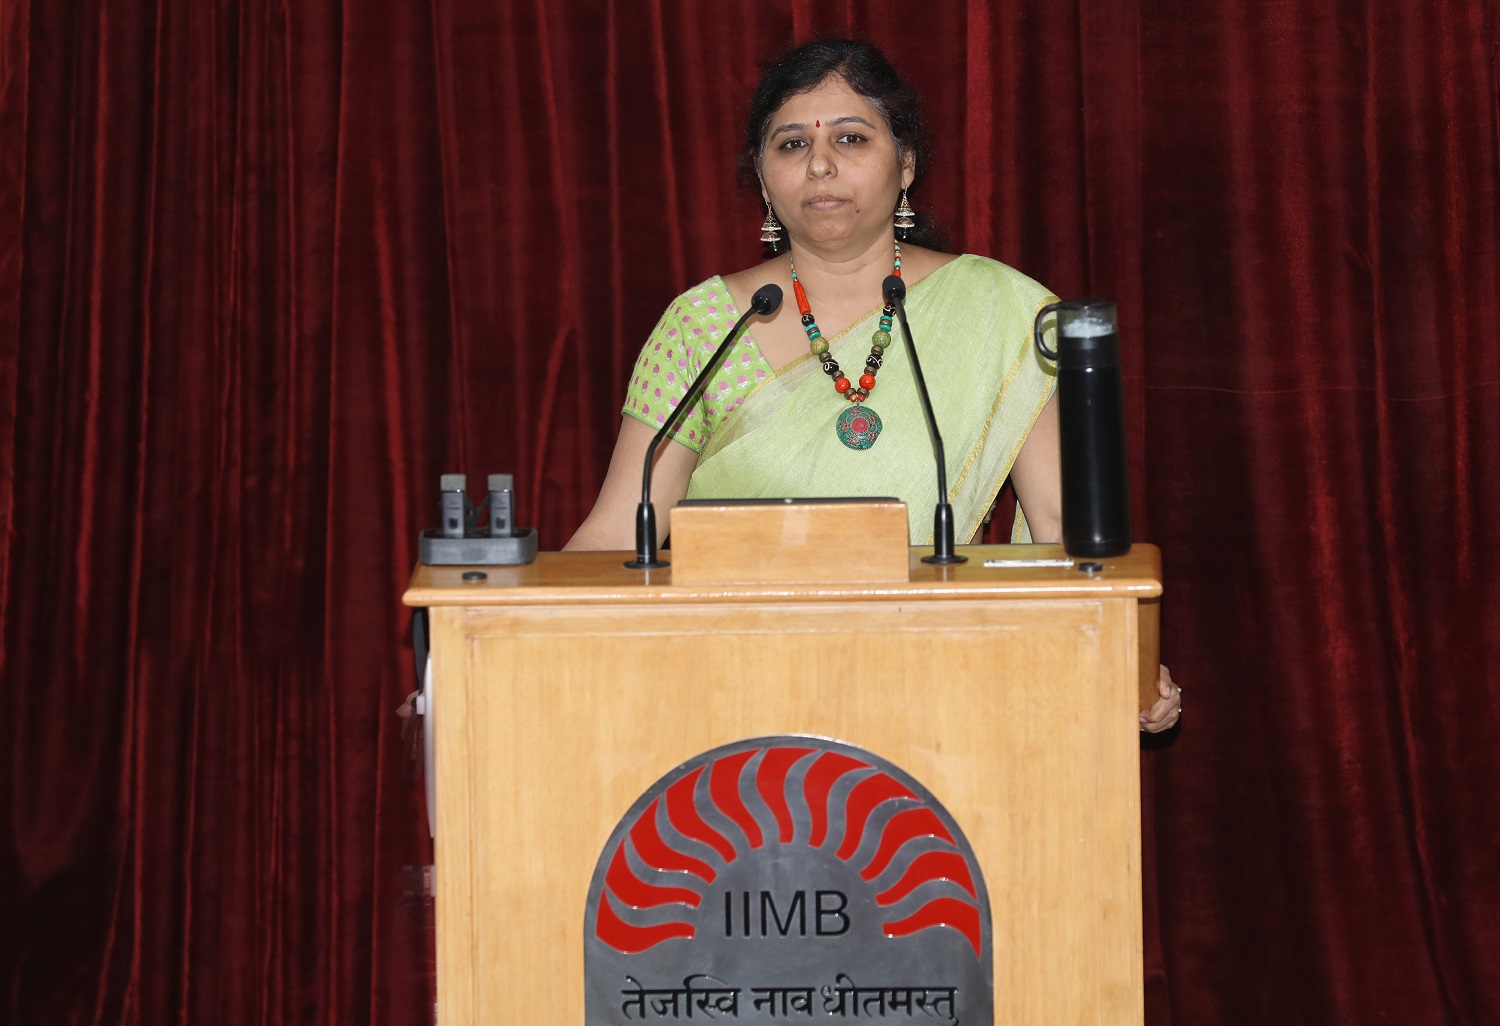 Professor Haritha Saranga , Chairperson, Sustainability Task Force at IIMB, makes a presentation on the institute’s sustainability initiatives.